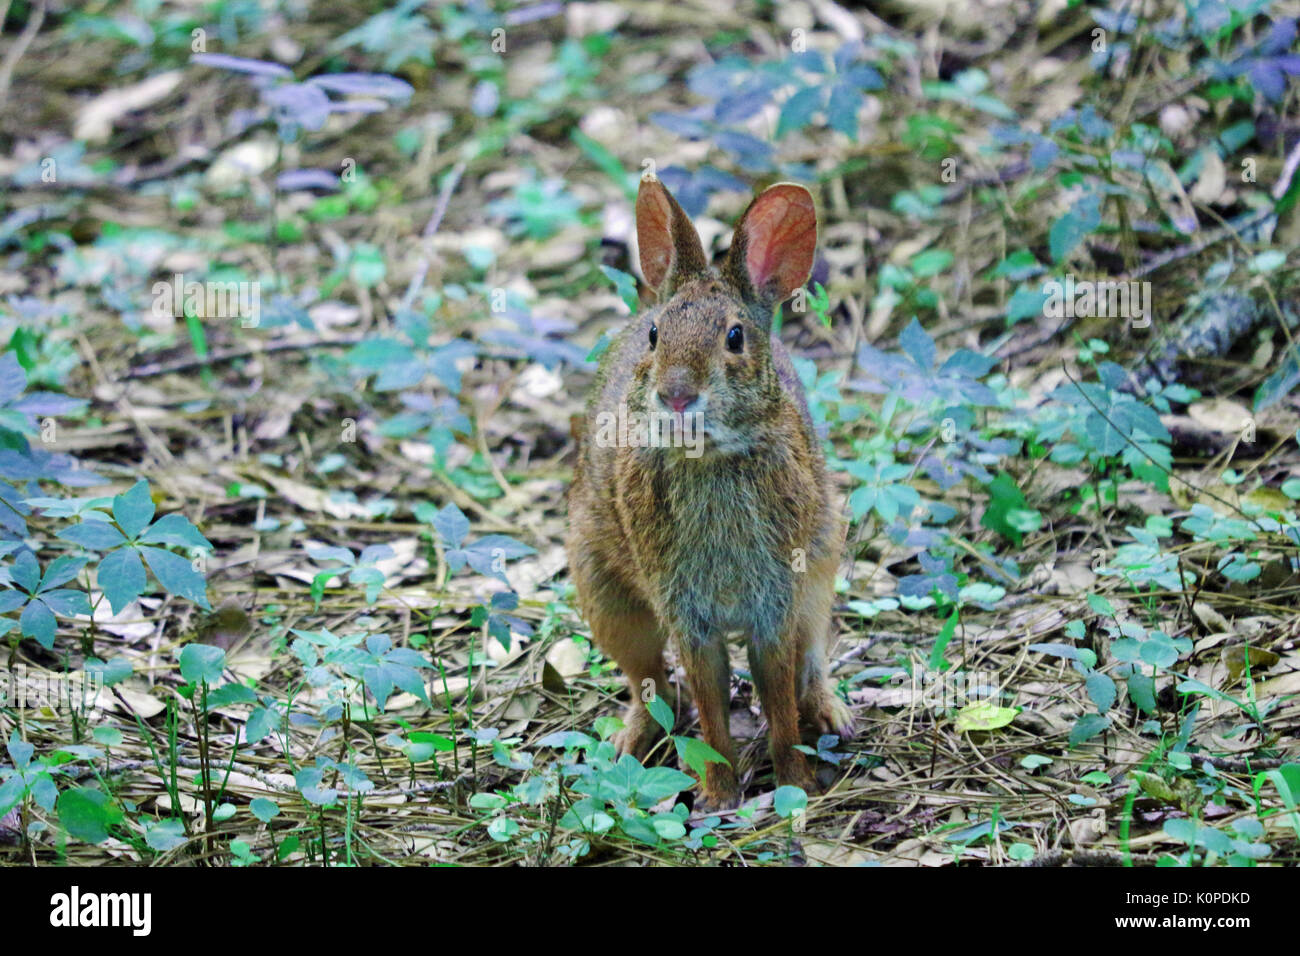 A Bunny Rabbit In a Woodland Area Stock Photo